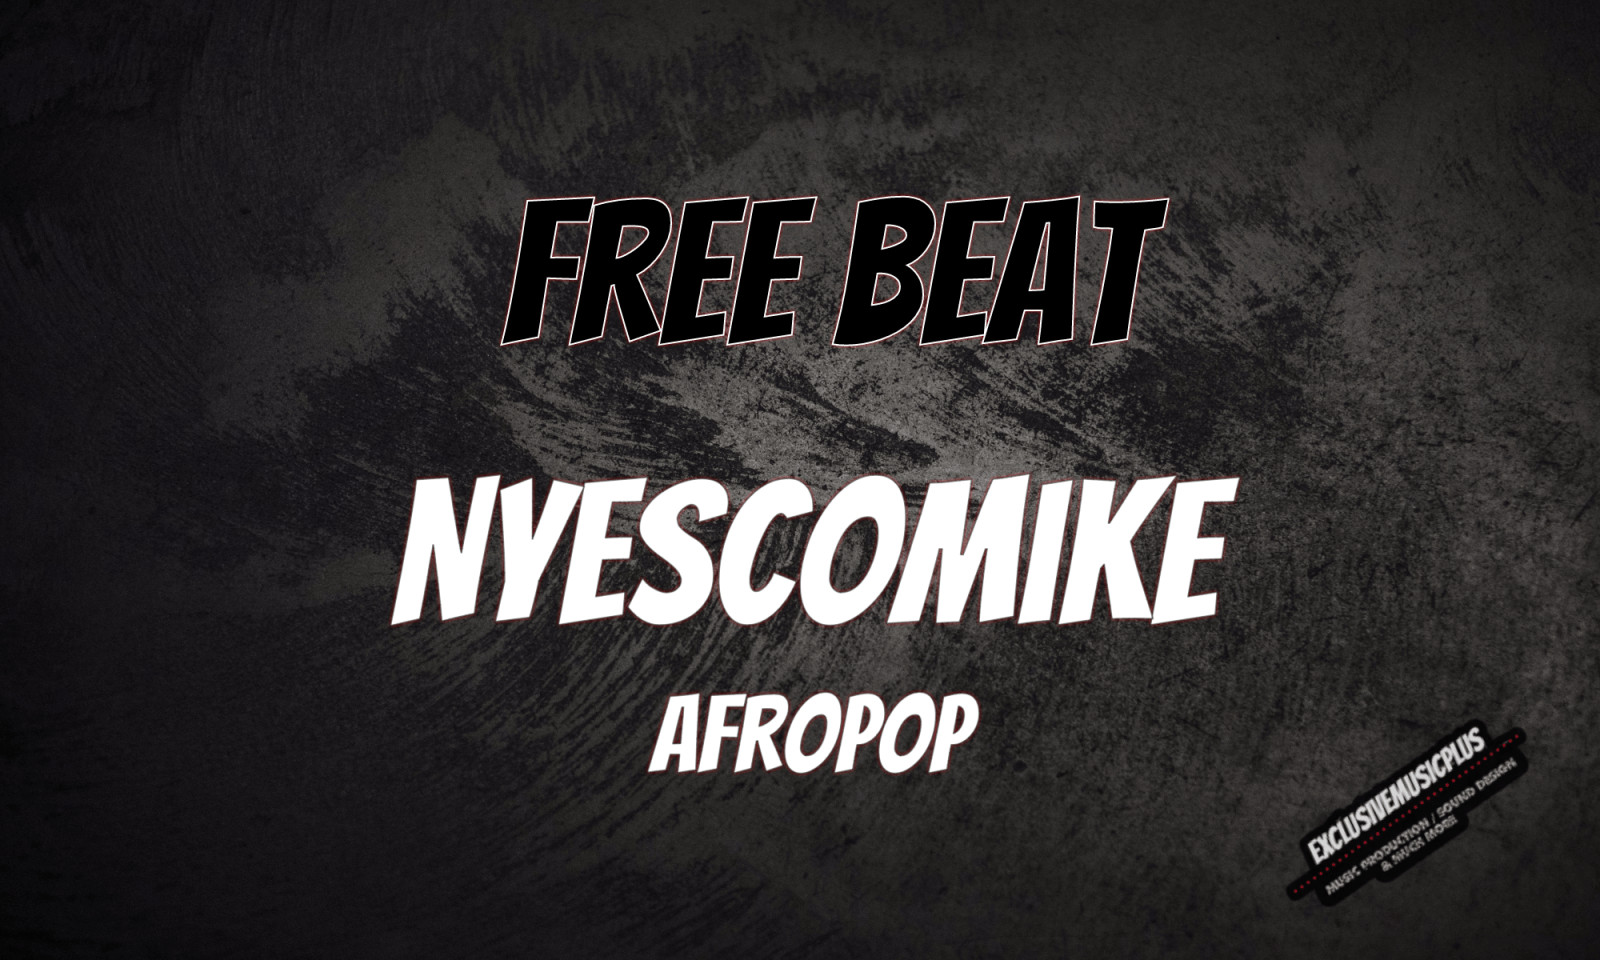 [Free Beat] Nyescomike - Afropop